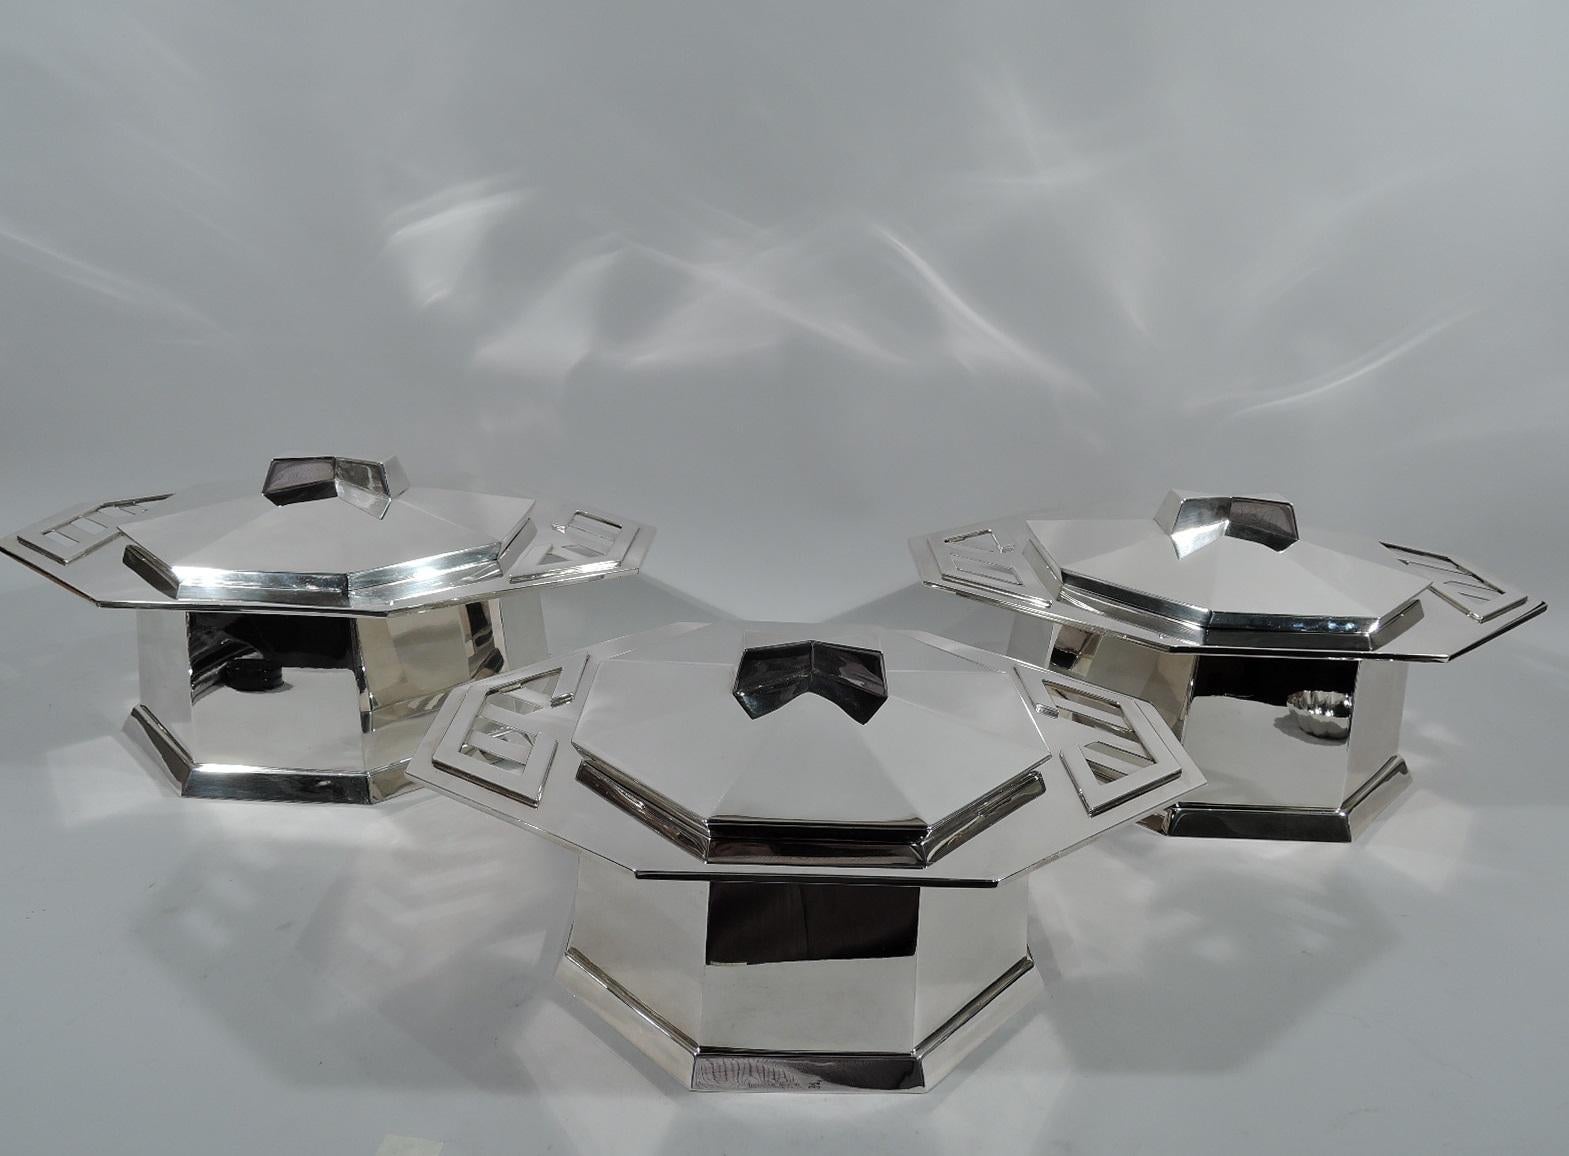 Set of three sterling silver covered tureens after a design by Frank Lloyd Wright. Retailed by Tiffany & Co. in New York. This set comprises 1 small and 2 large tureens. Each: Octagonal bowl and wide and overhanging rim with applied and cutout